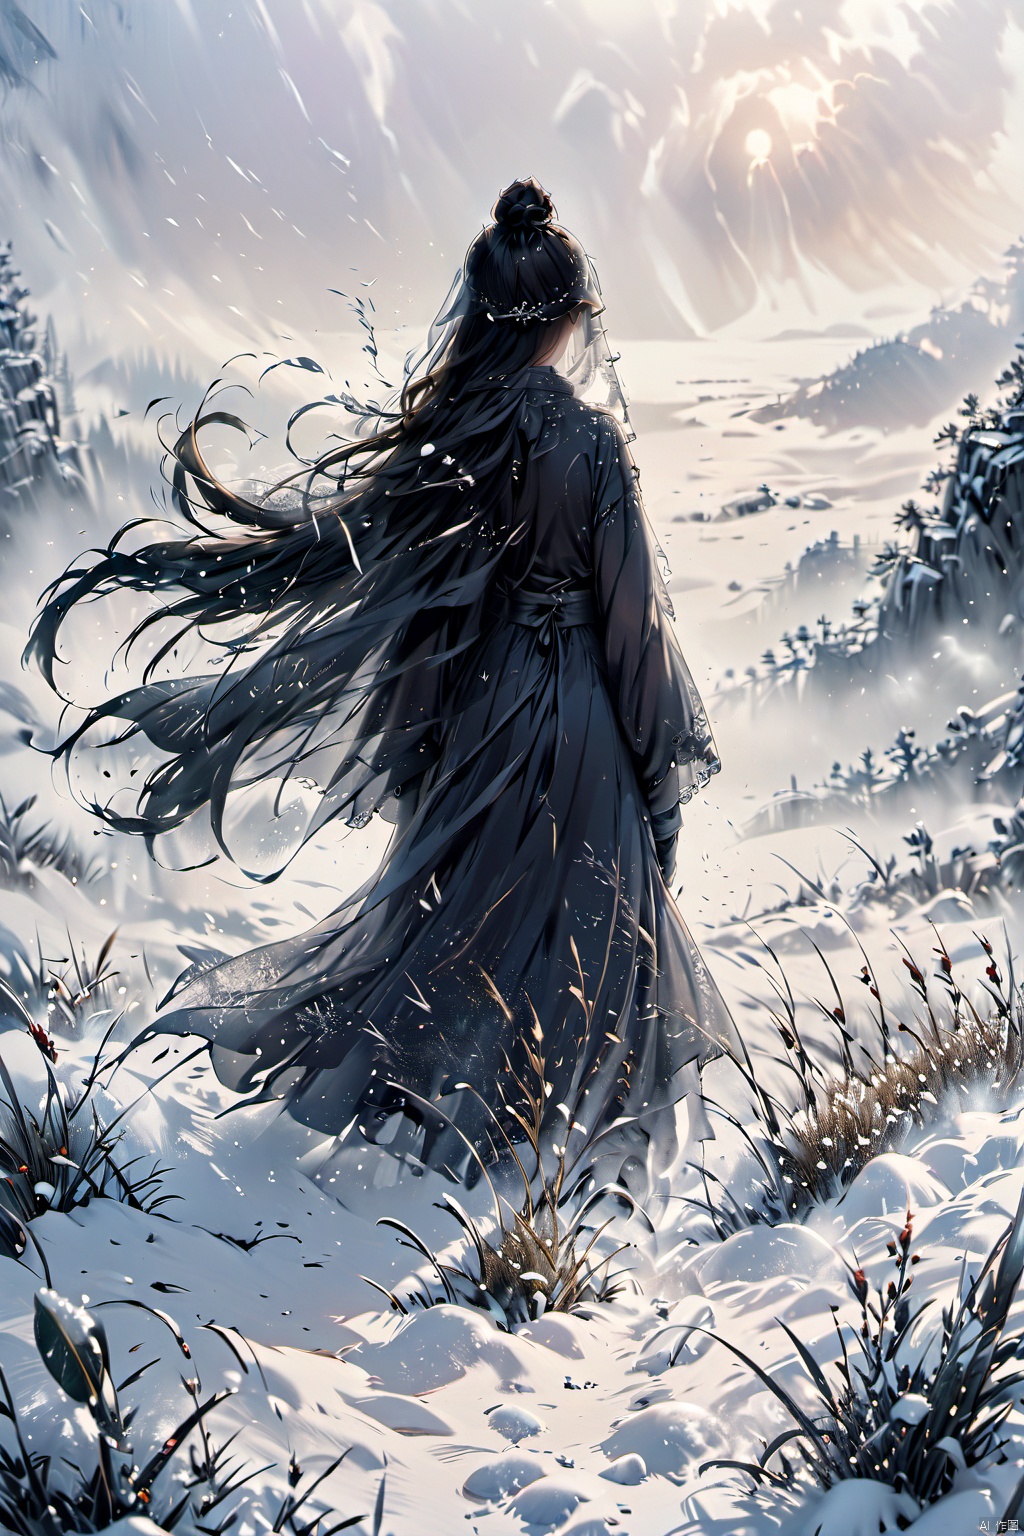  Amidst a raging blizzard, a solitary figure stands resilient in a snow-covered field, viewed from behind. The girl's silhouette is barely discernible through the thick veil of swirling snowflakes. Despite the intensity of the storm, there's an aura of serenity and strength emanating from her presence, as she stands amidst the chaotic beauty of the blizzard's embrace. The field of view captures the vastness of the wintry landscape, emphasizing the girl's solitary stance against the elements, more_details:-1, more_details:0, more_details:0.5, more_details:1, more_details:1.5